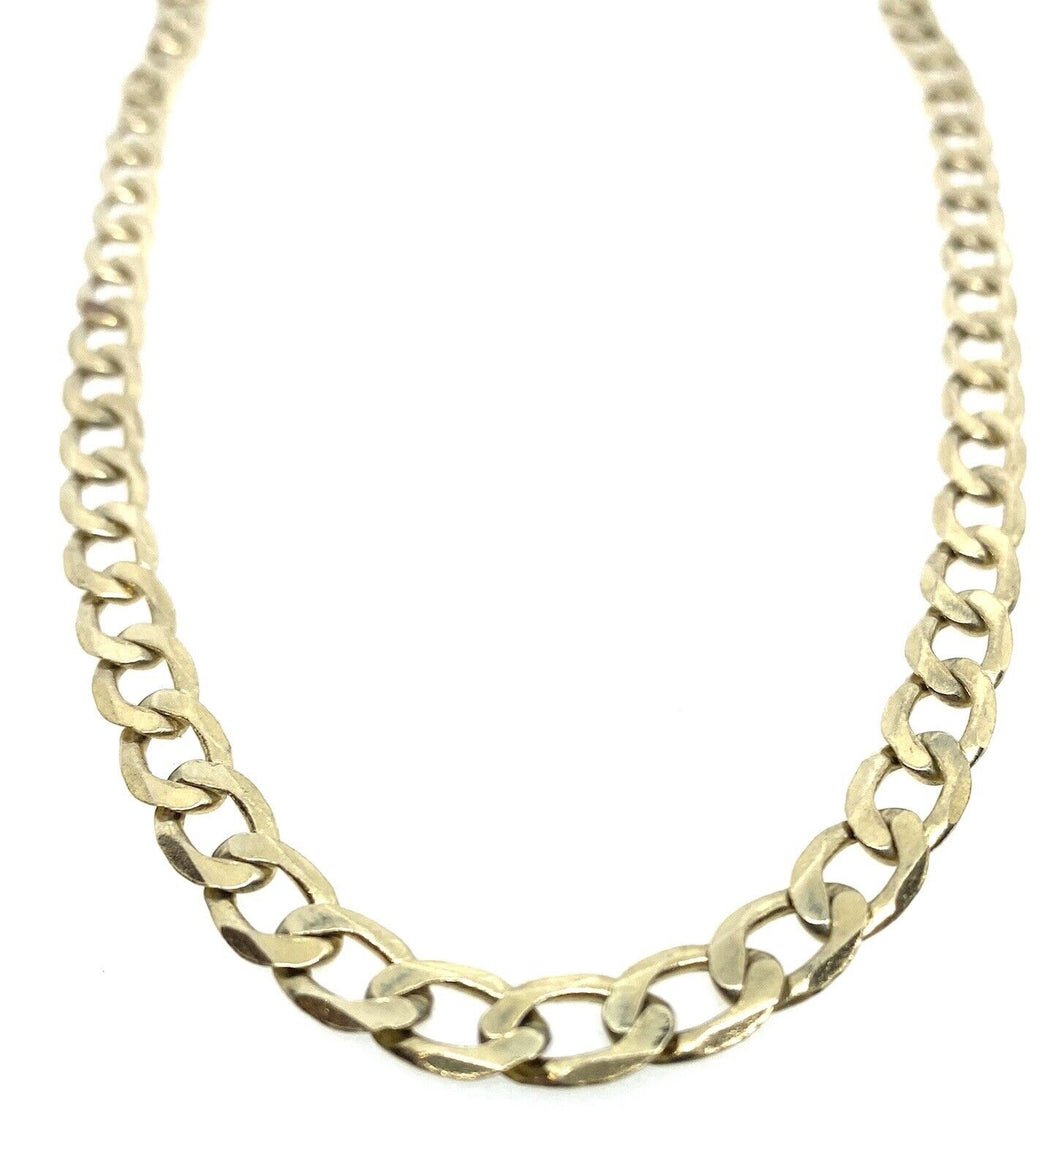 Gold Curb Chain 9ct Yellow Gold Long Heavy 20” Solid Gold Man’s 6mm Curb Chain